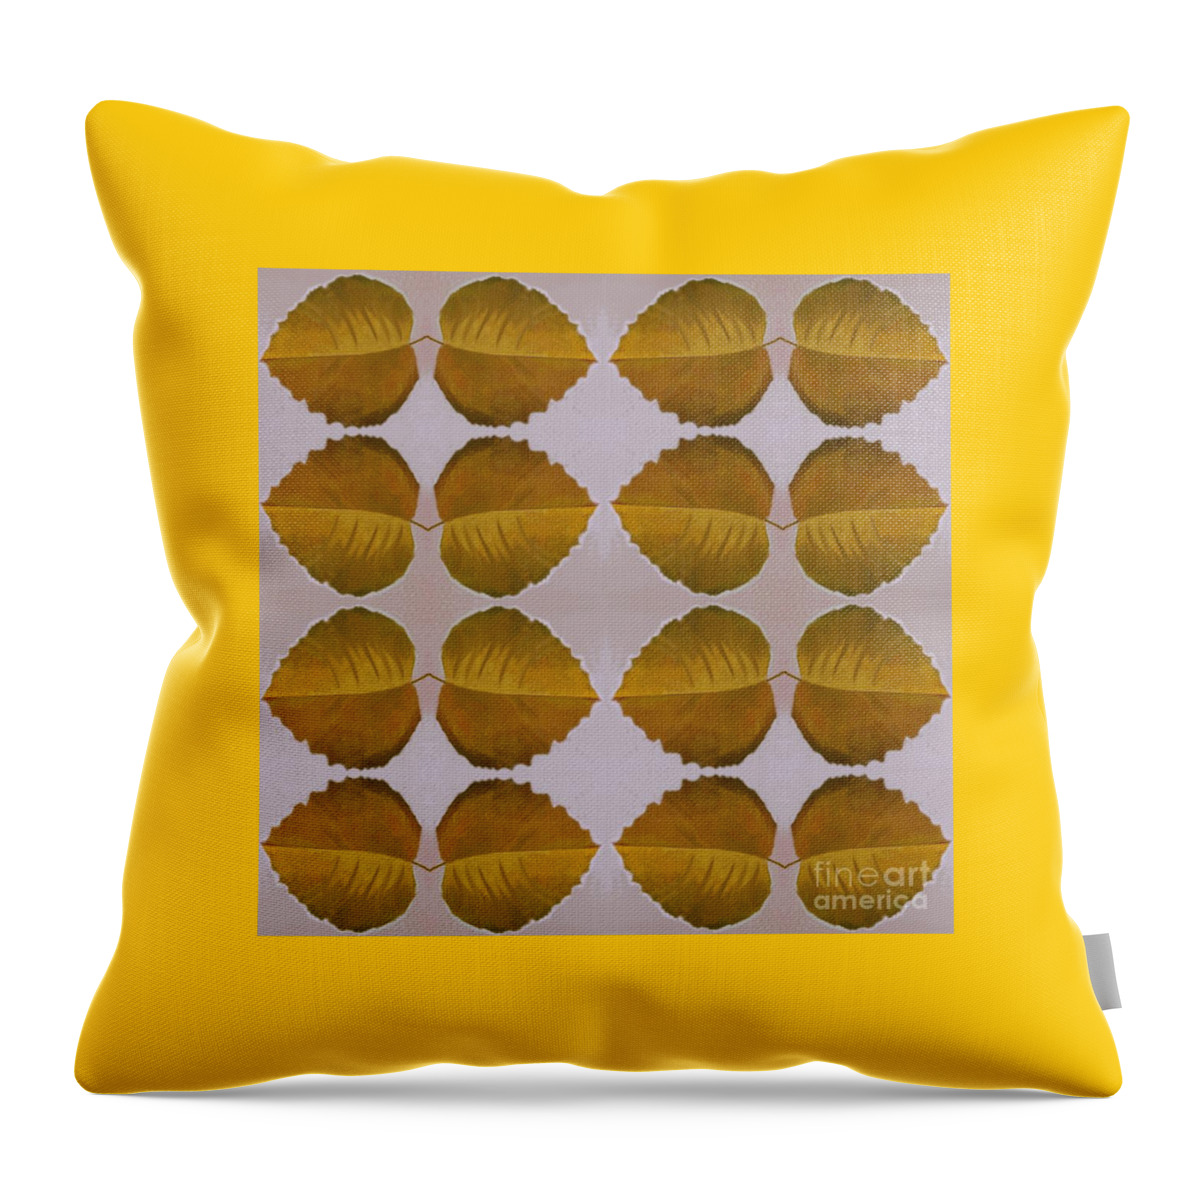 Leaves Throw Pillow featuring the digital art Fallen Leaves Arrangement In Yellow by Helena Tiainen